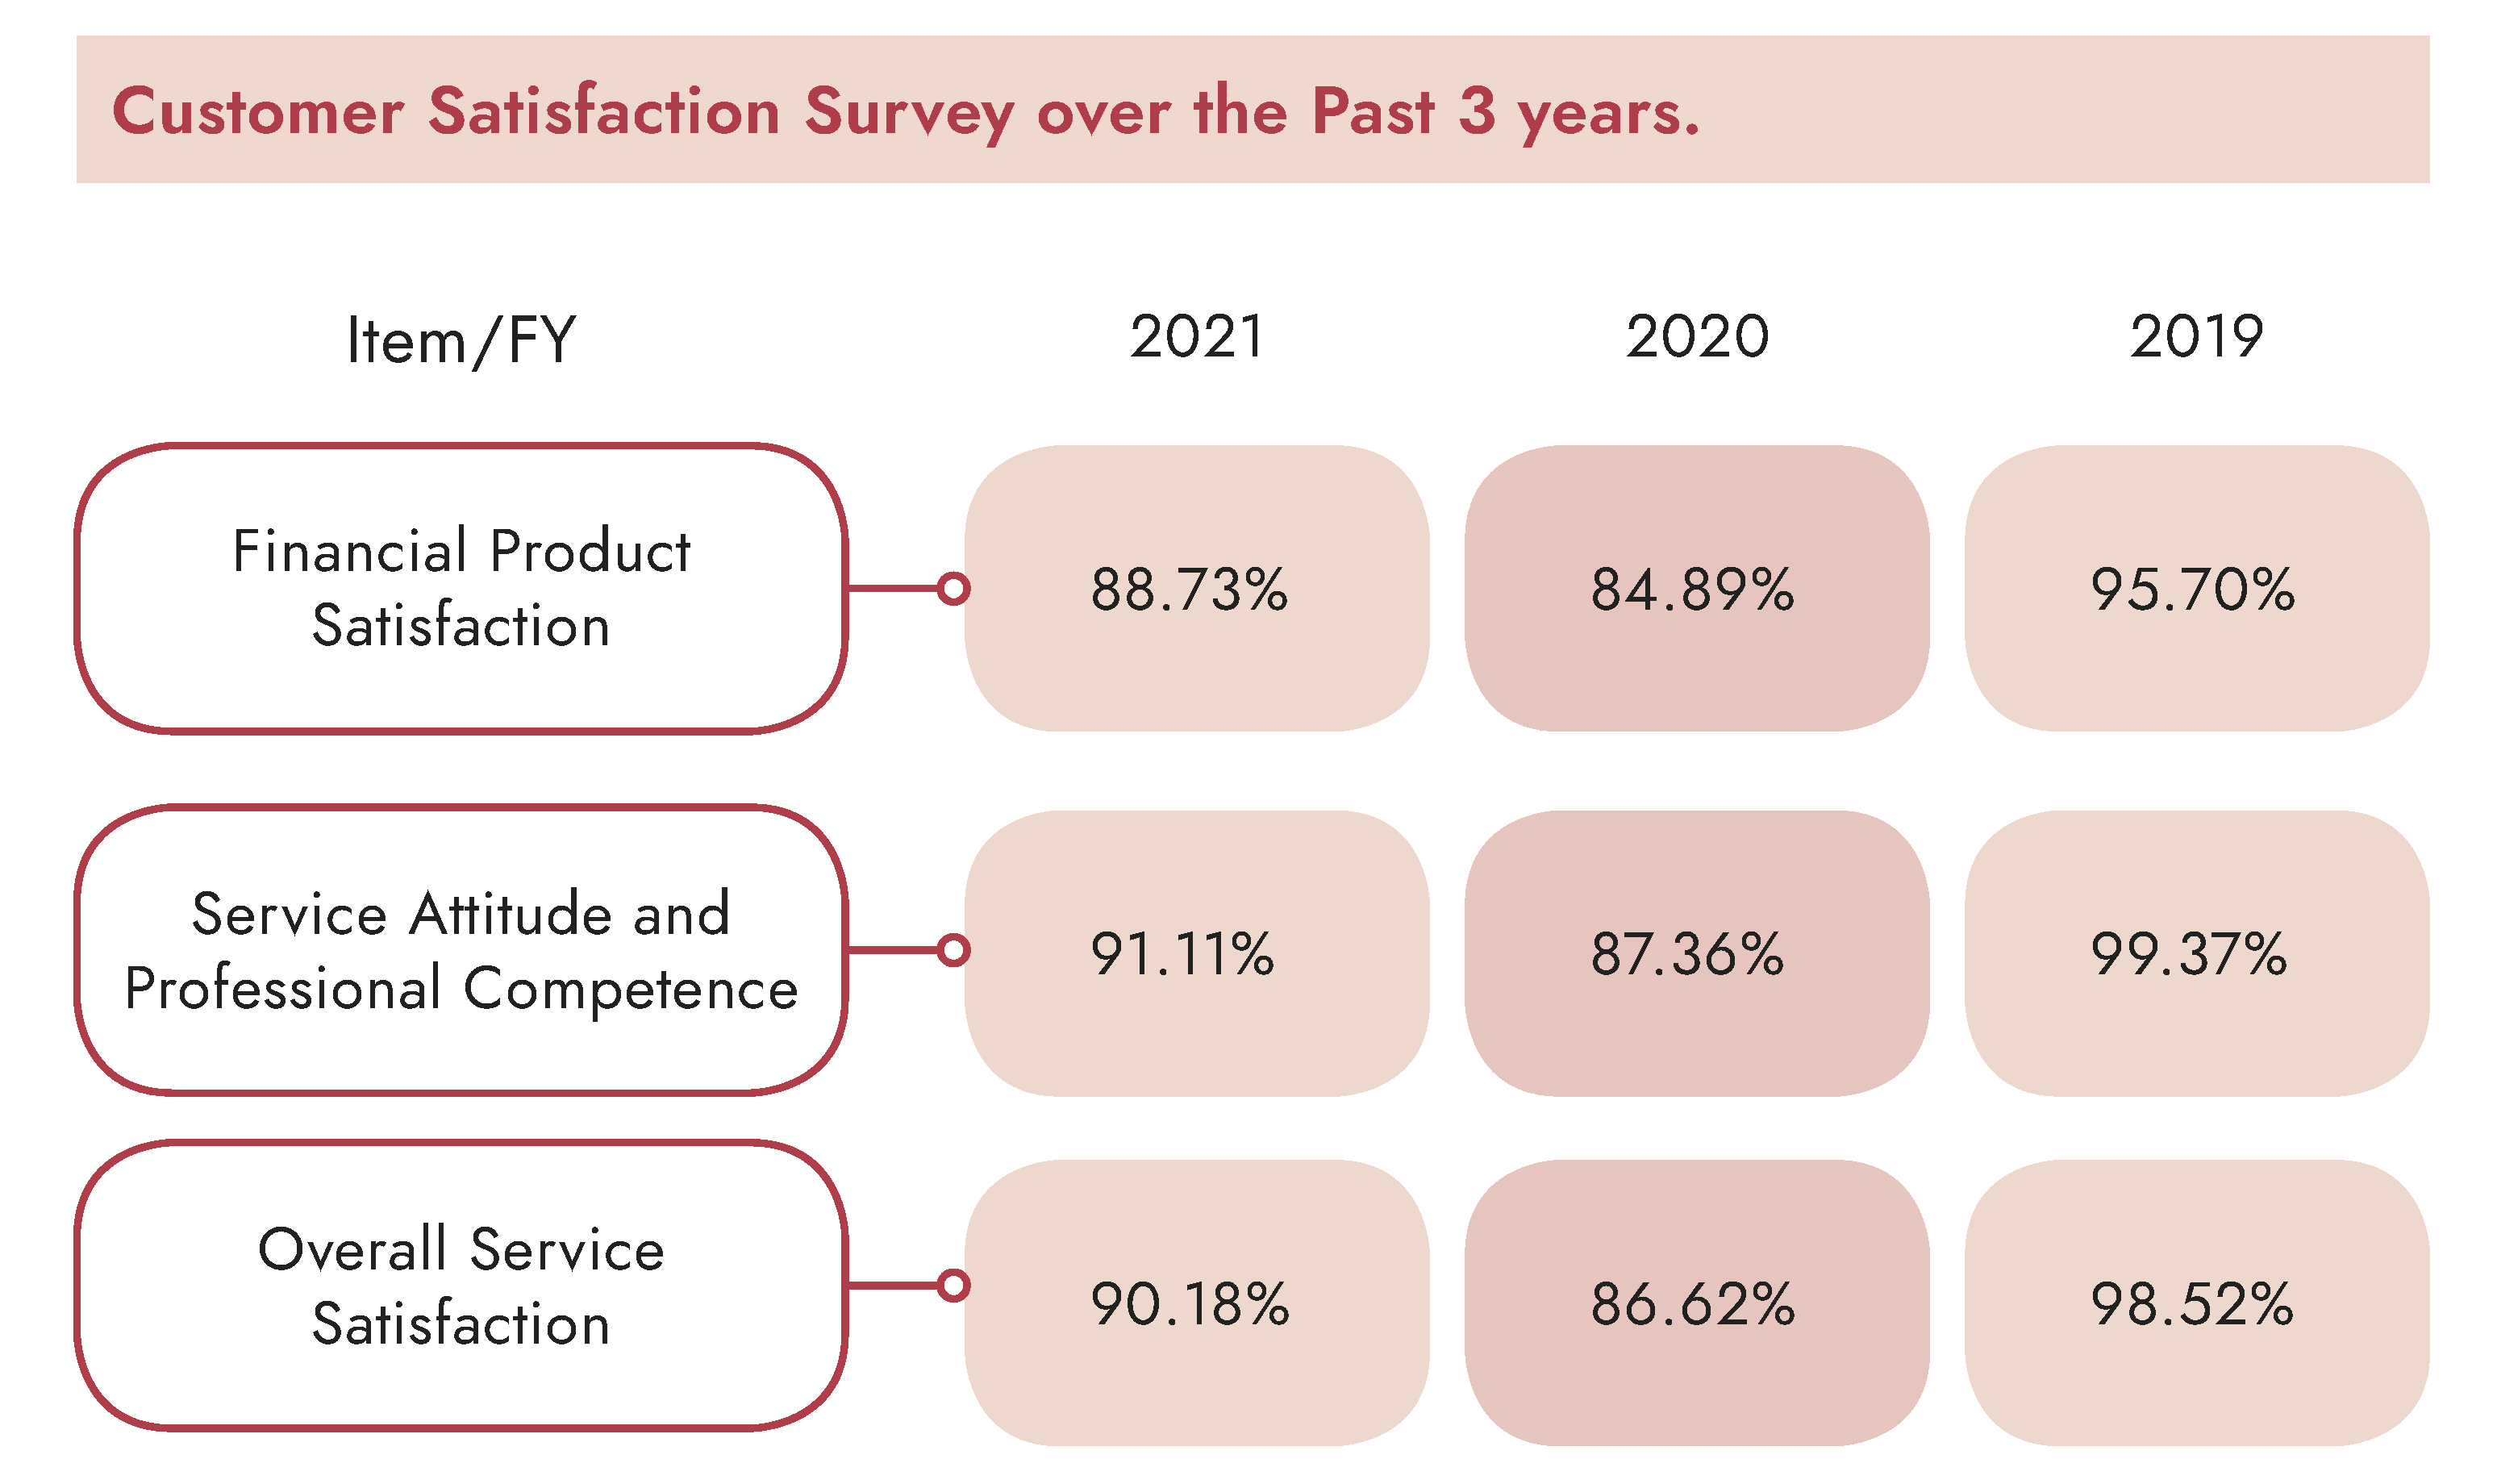 Customer Satisfaction Survey over the Past 3 years.